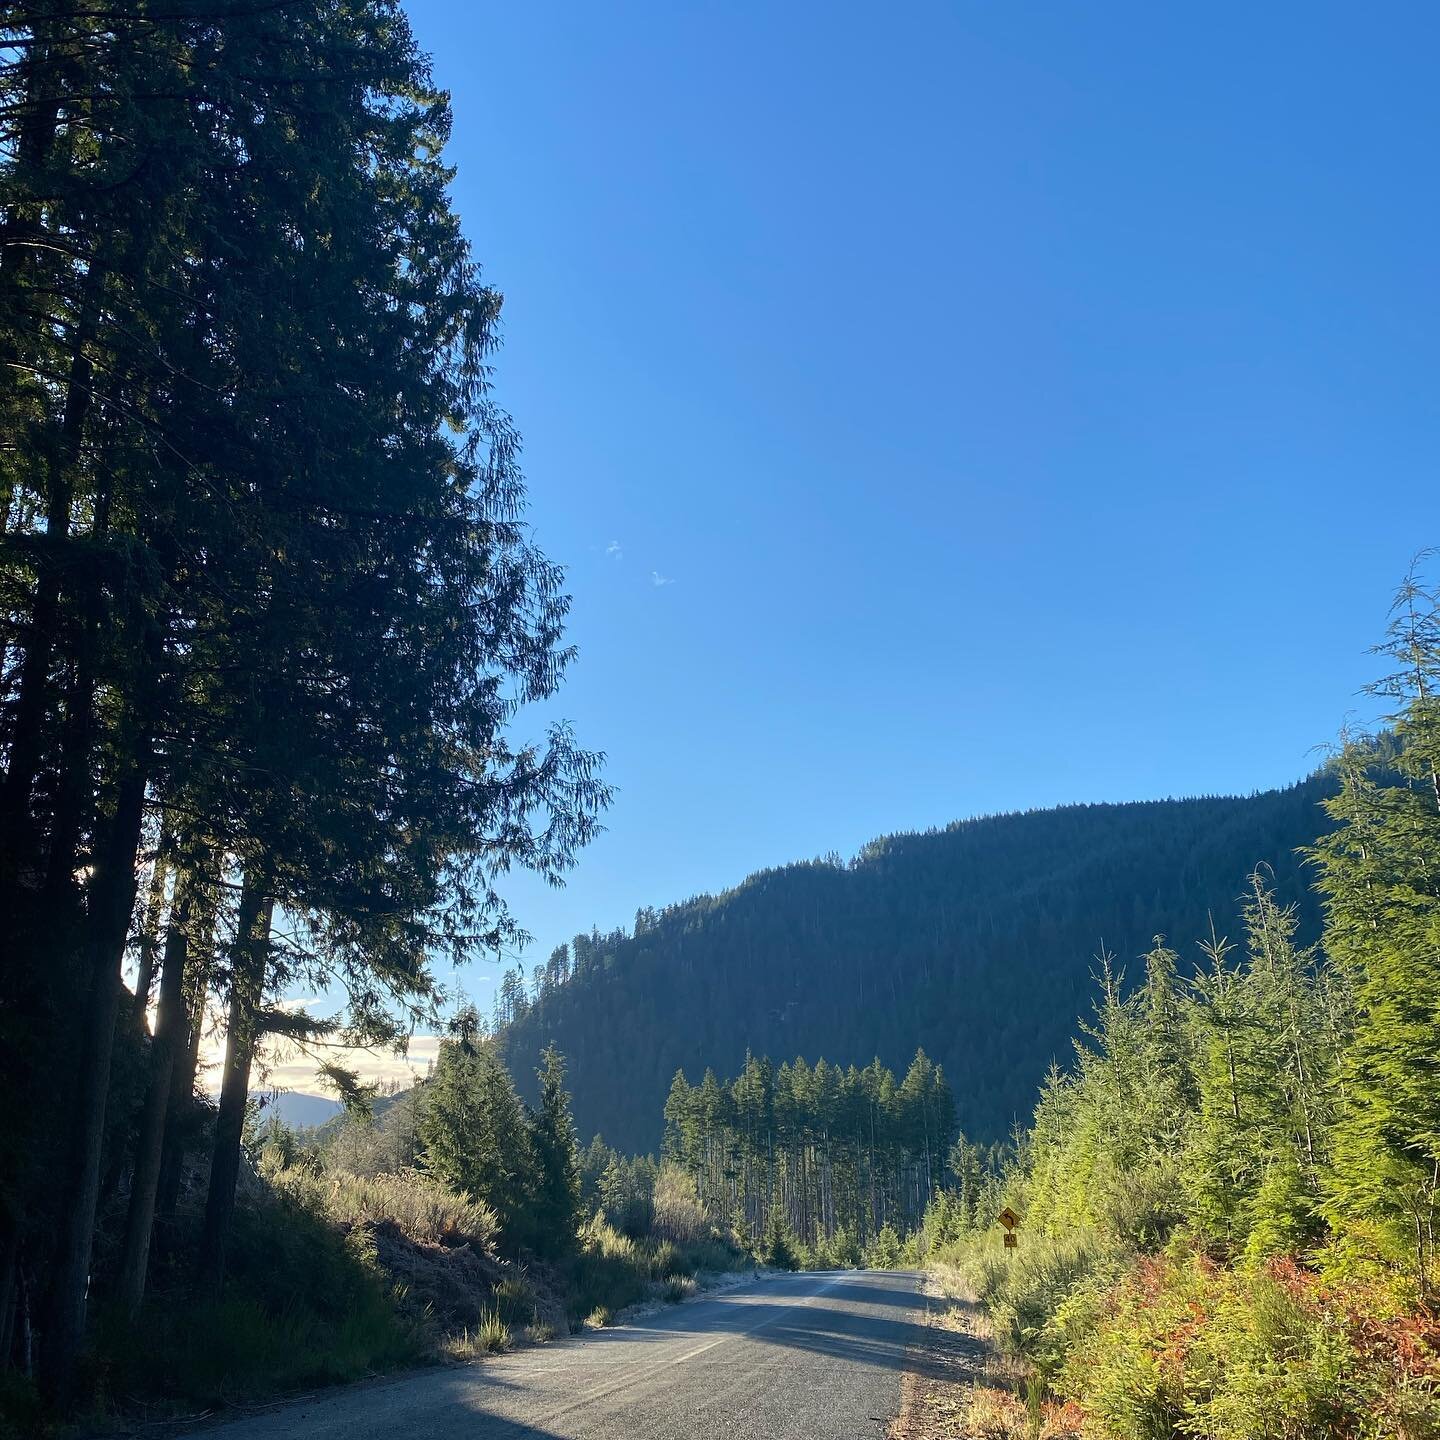 Don&rsquo;t rush the drive out to Port Renfrew, you might miss something beautiful 🍂

#pacificmarinecircleroute #portrenfrew #westcoast #westcoastwinter #destinationbc